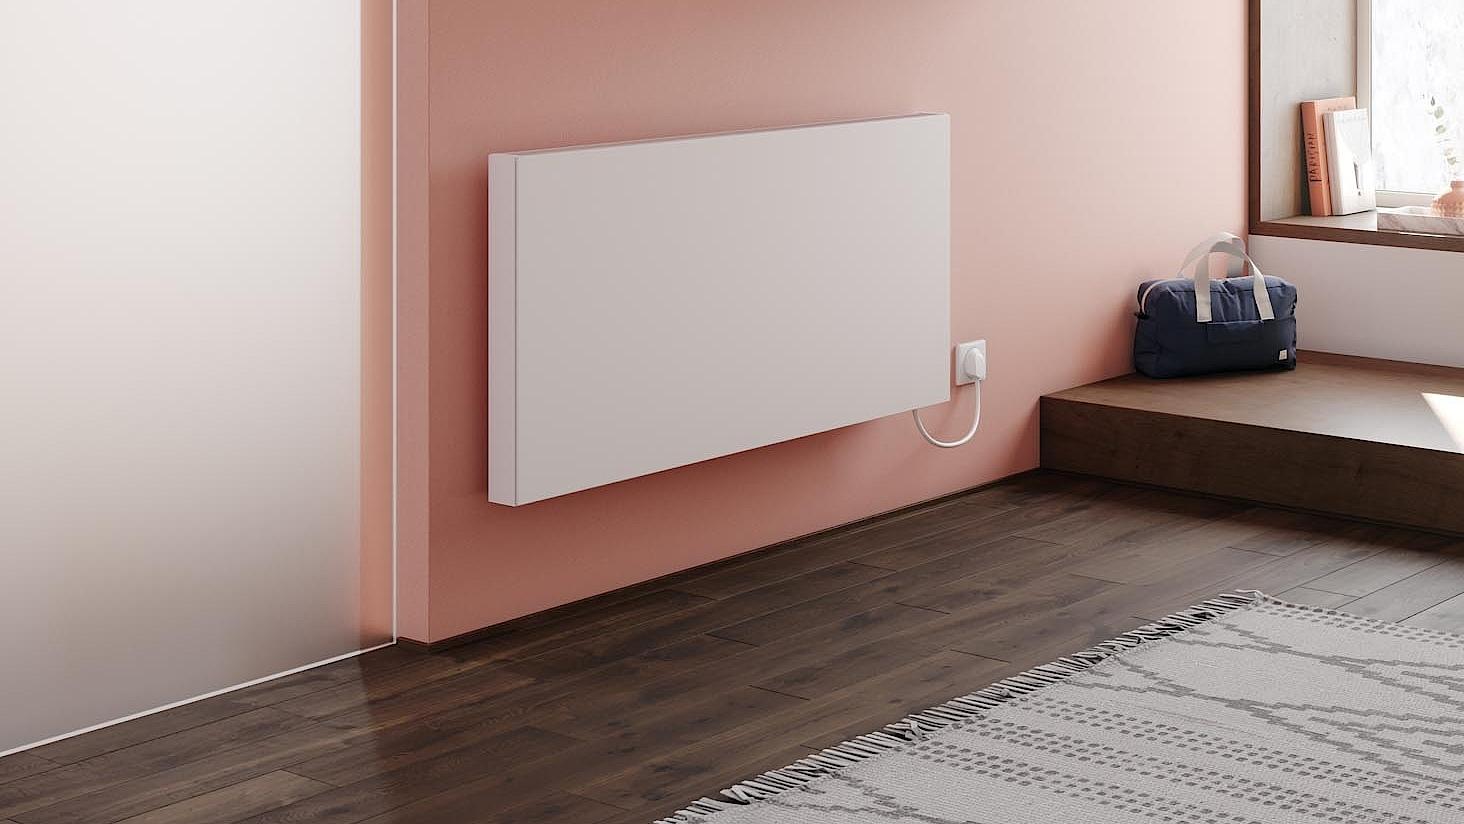 Kermi x-therm +e electric steel panel radiators can be used in any location where there is no connection to the central heating network.